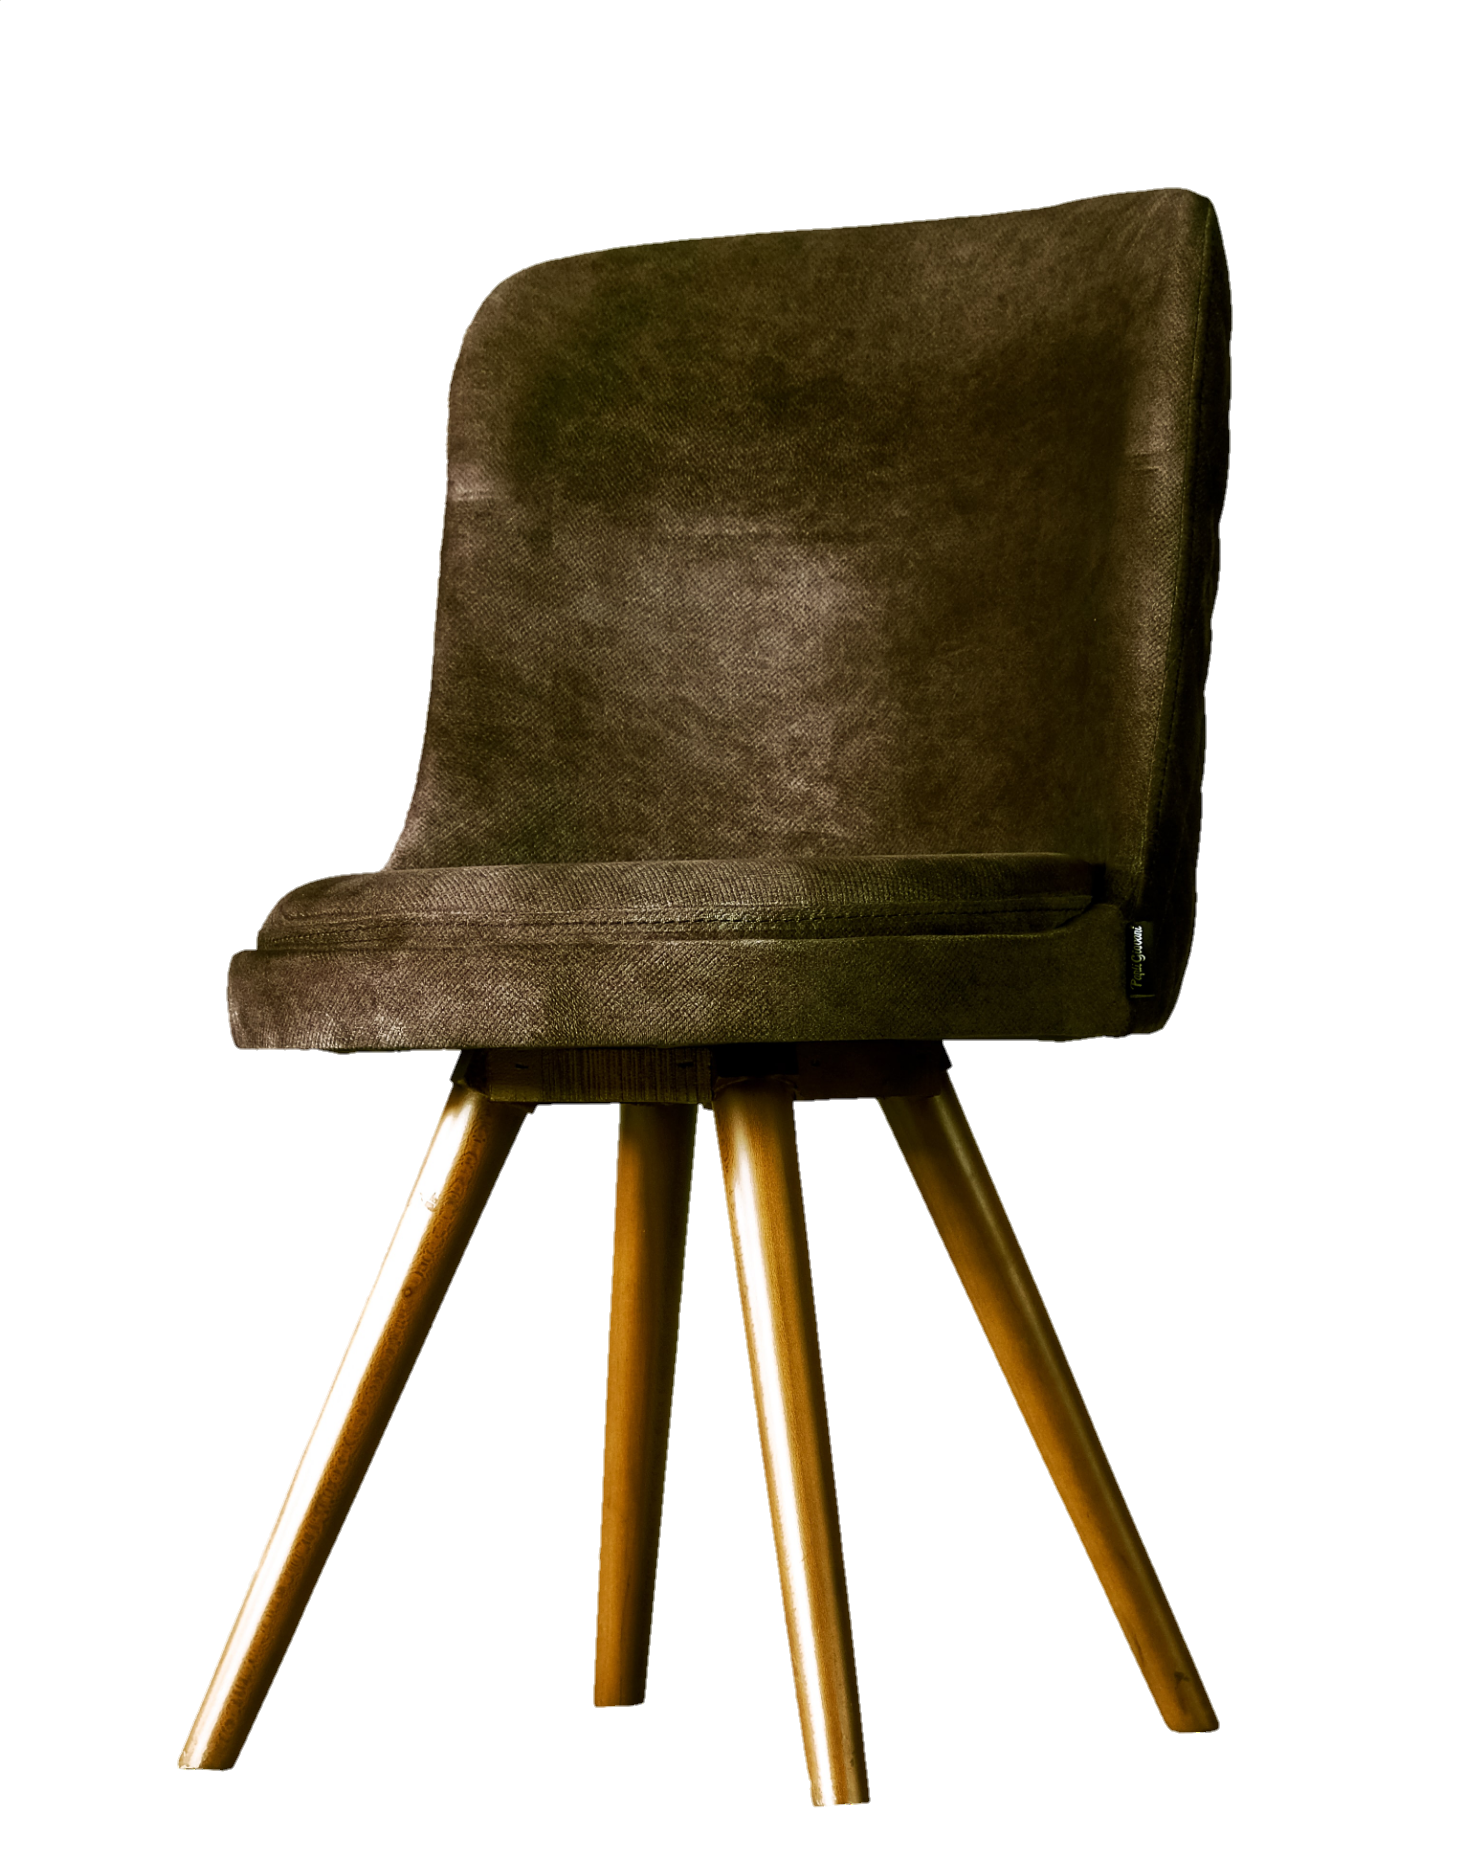 chair-png-image-pngfre-4